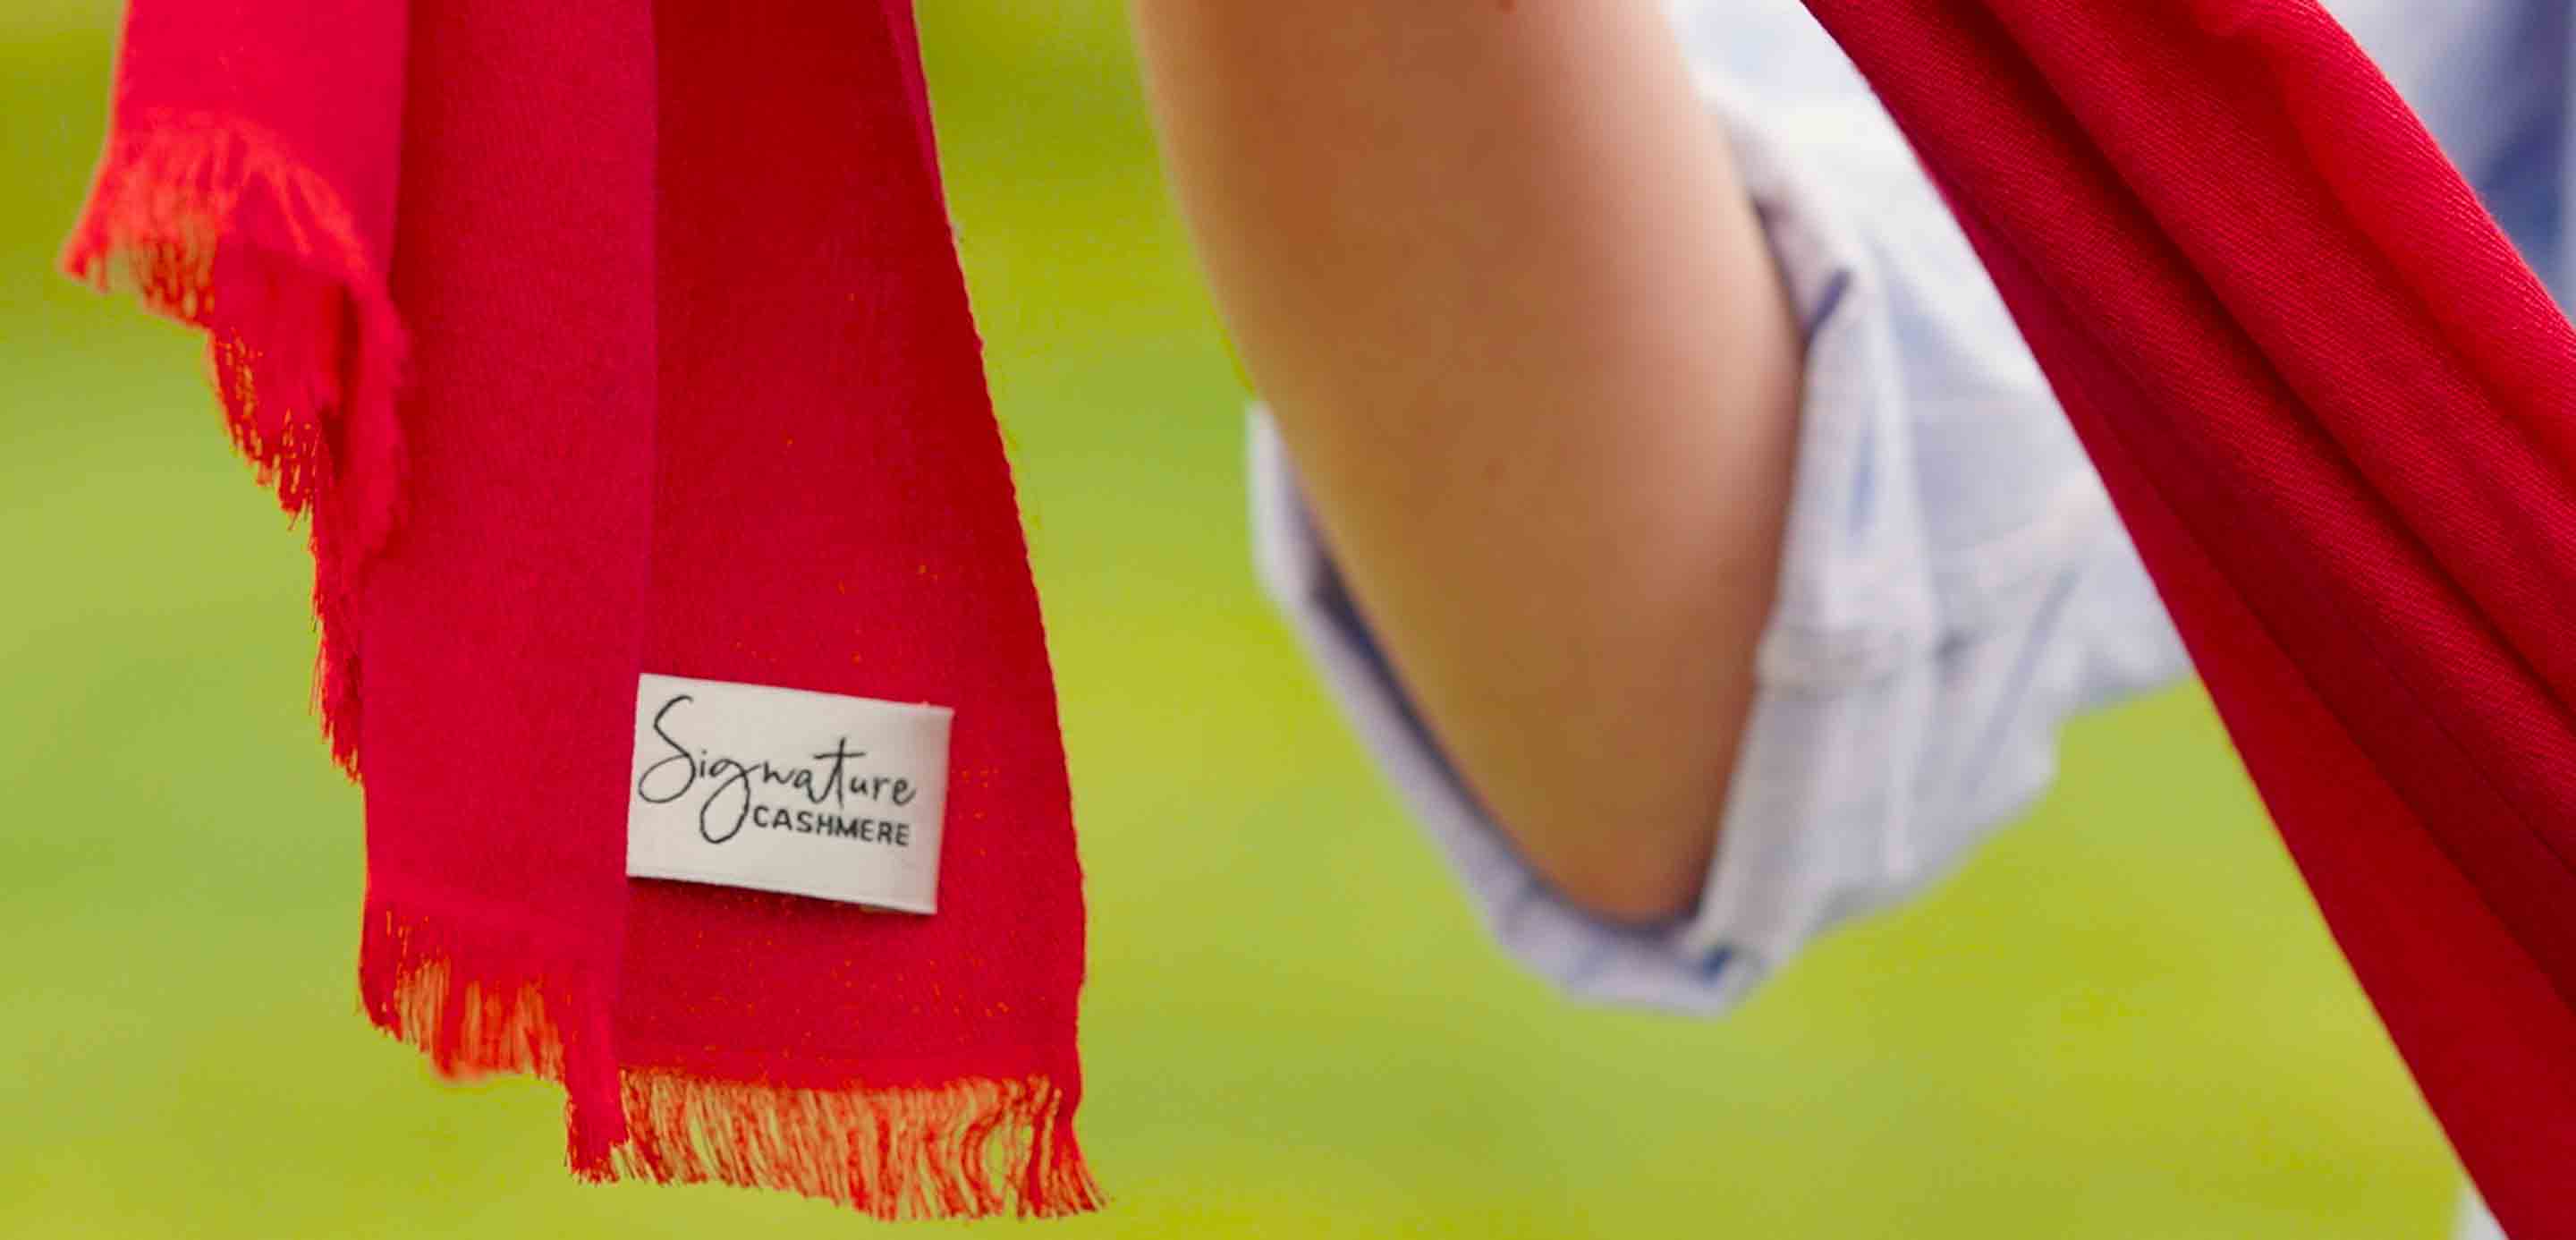 Close up of a person holding a red Signature Cashmere scarf